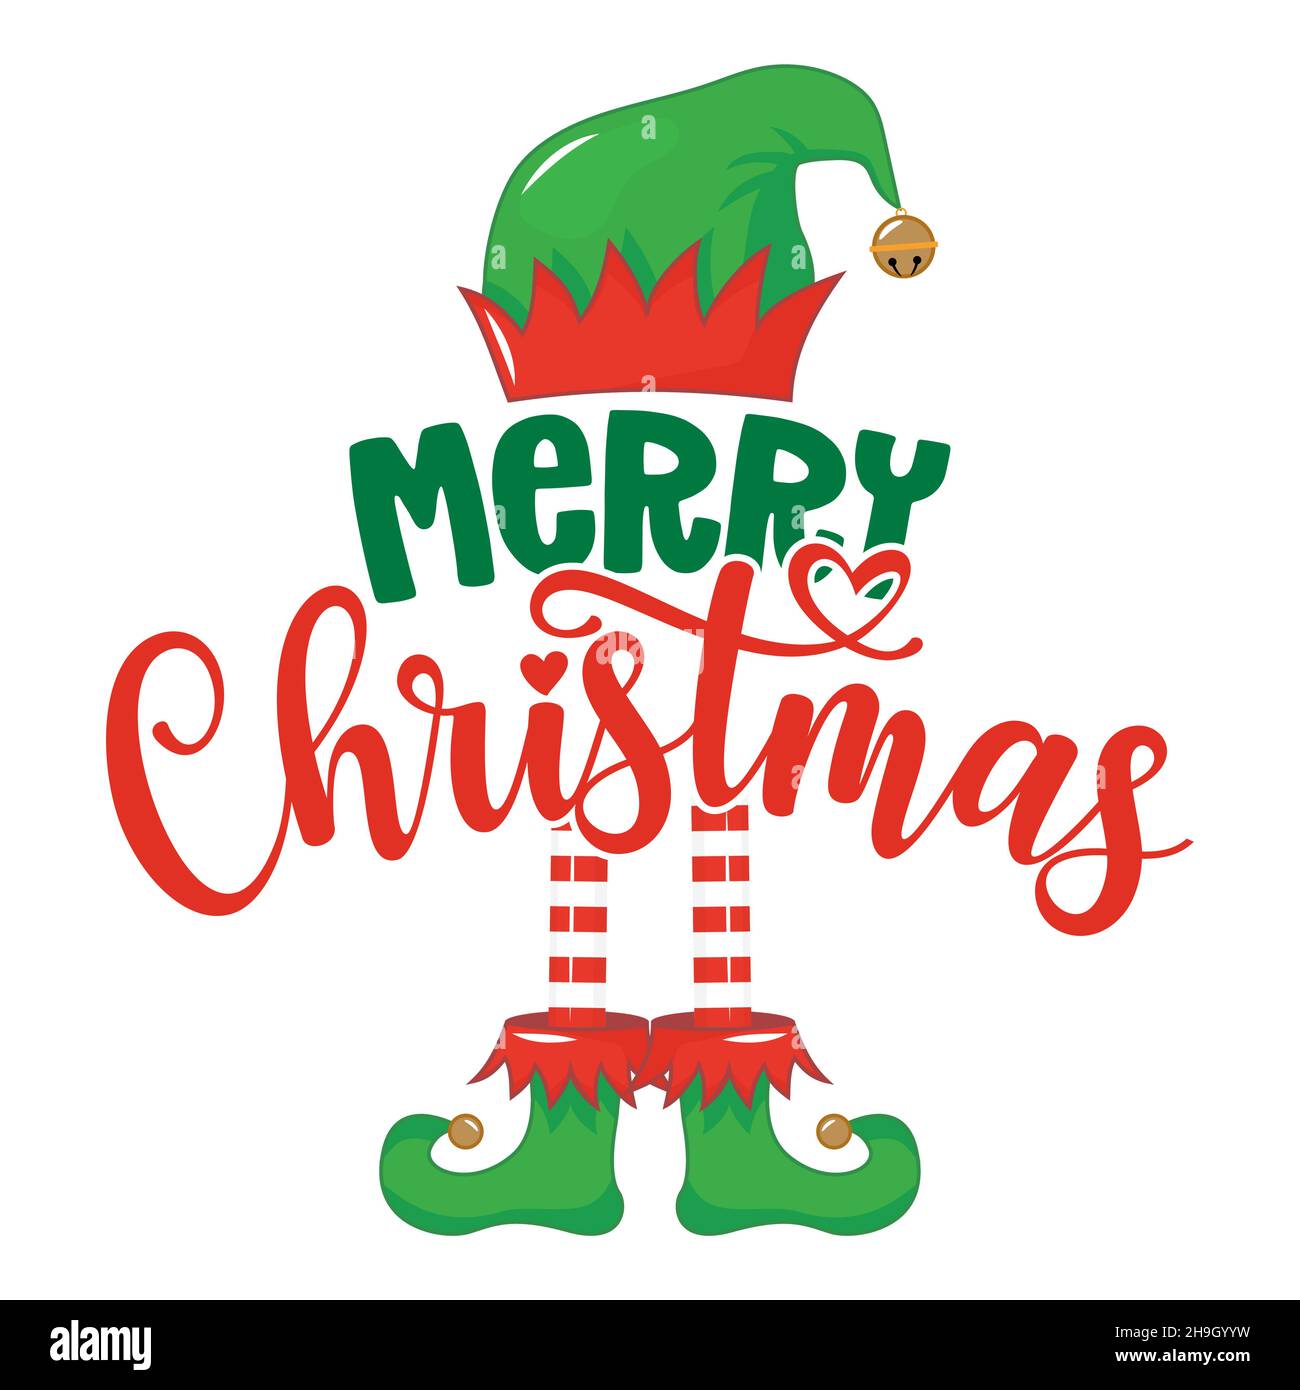 https://c8.alamy.com/comp/2H9GYYW/merry-christmas-phrase-for-christmas-baby-kid-clothes-or-ugly-sweaters-hand-drawn-lettering-for-xmas-greetings-cards-invitations-good-for-t-shir-2H9GYYW.jpg